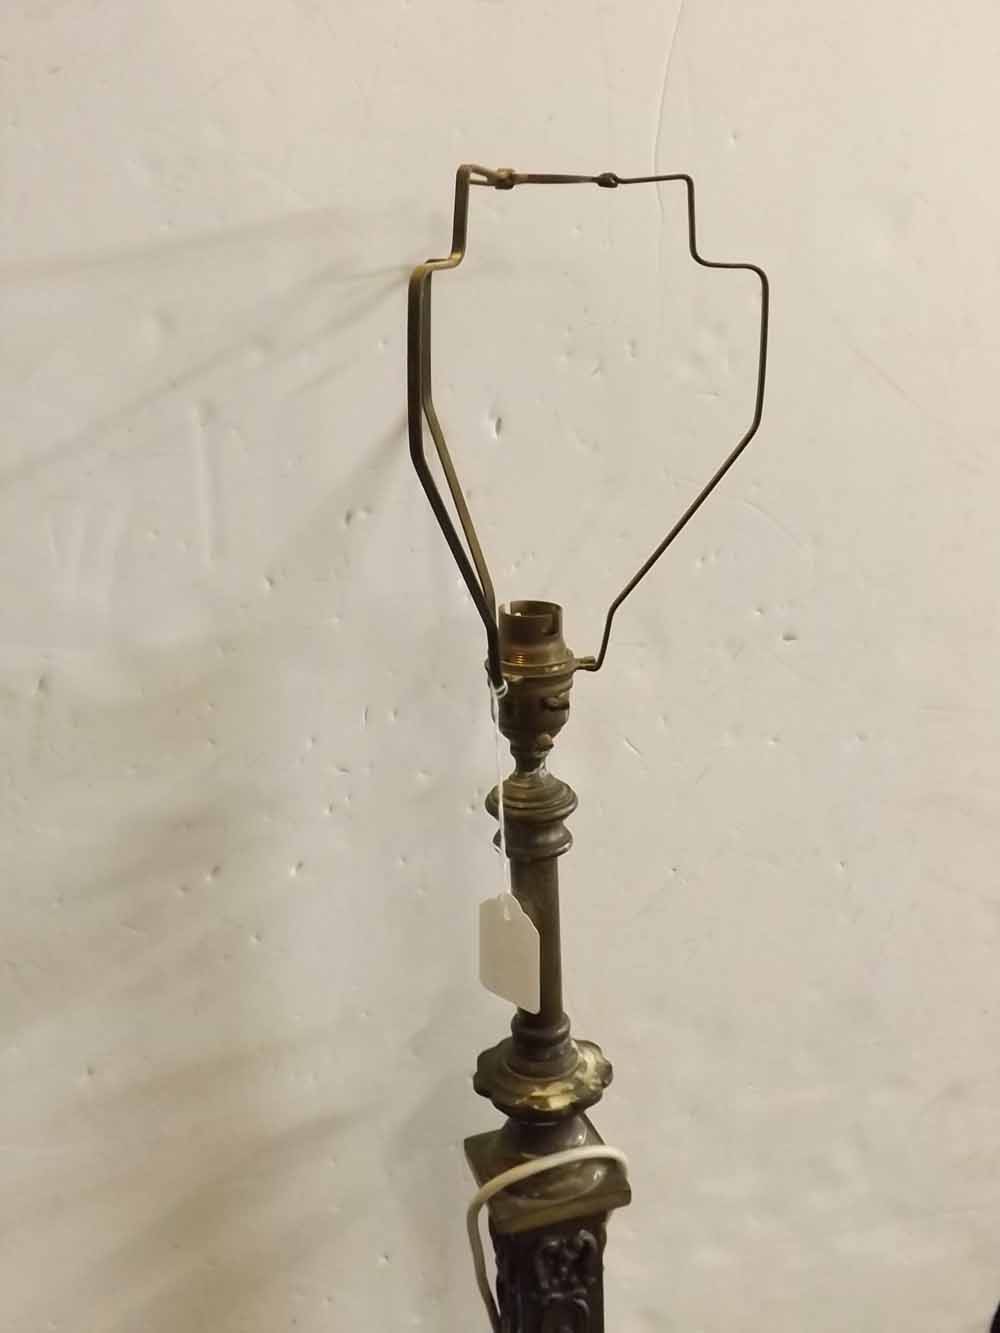 20th century brass square columned adjustable standard lamp with a square base on paw casters, - Image 2 of 3